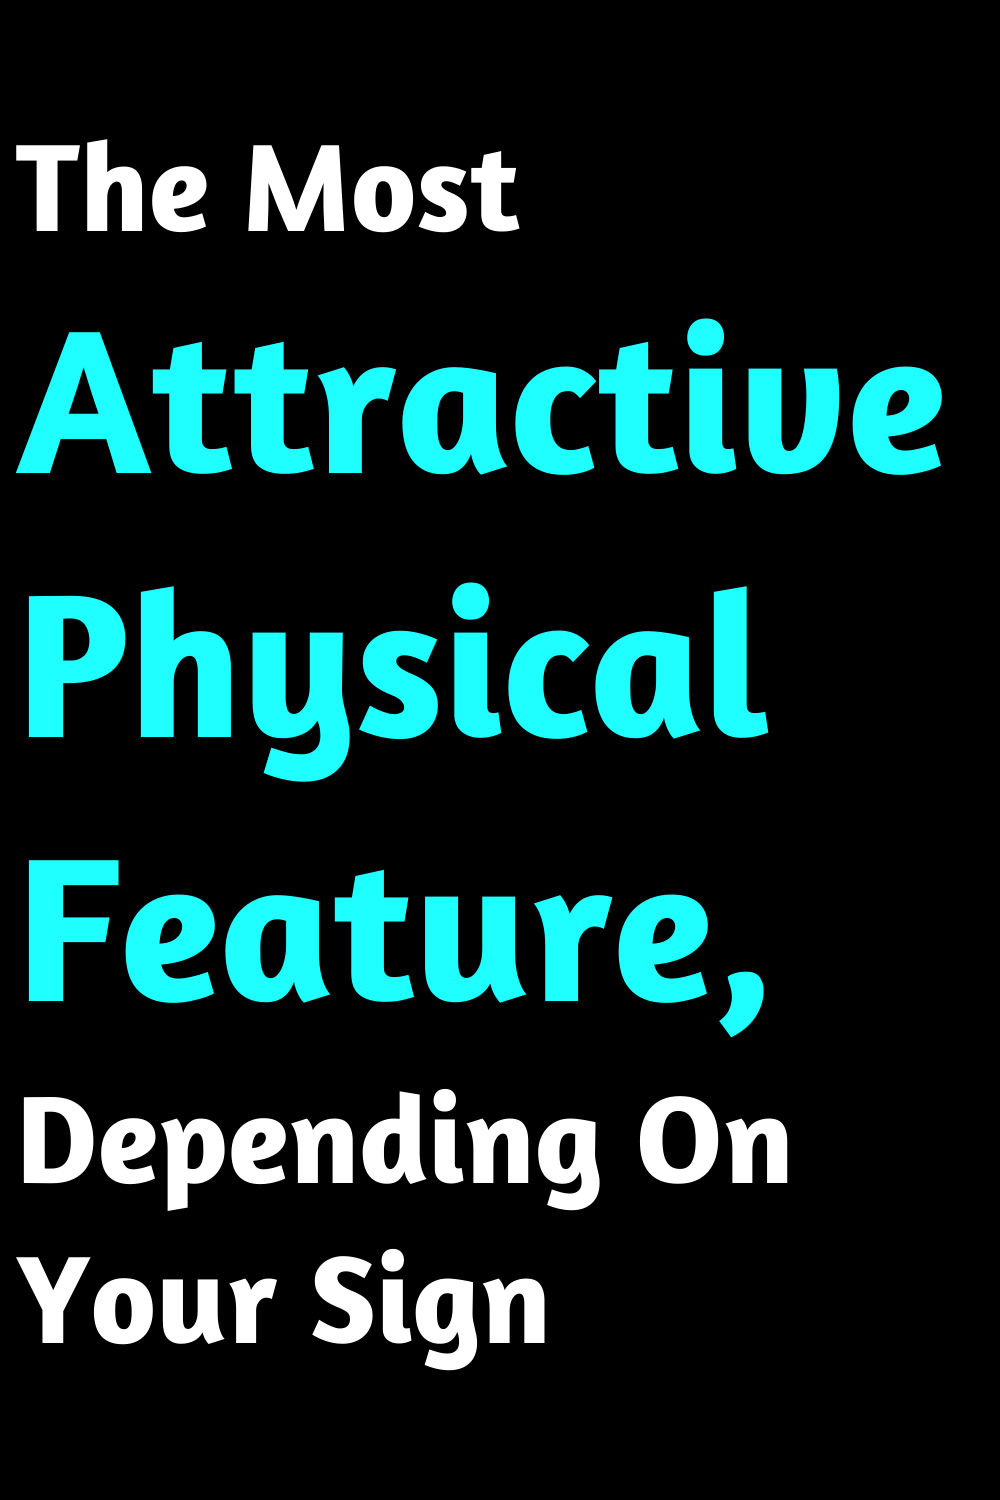 The Most Attractive Physical Feature, Depending On Your Sign